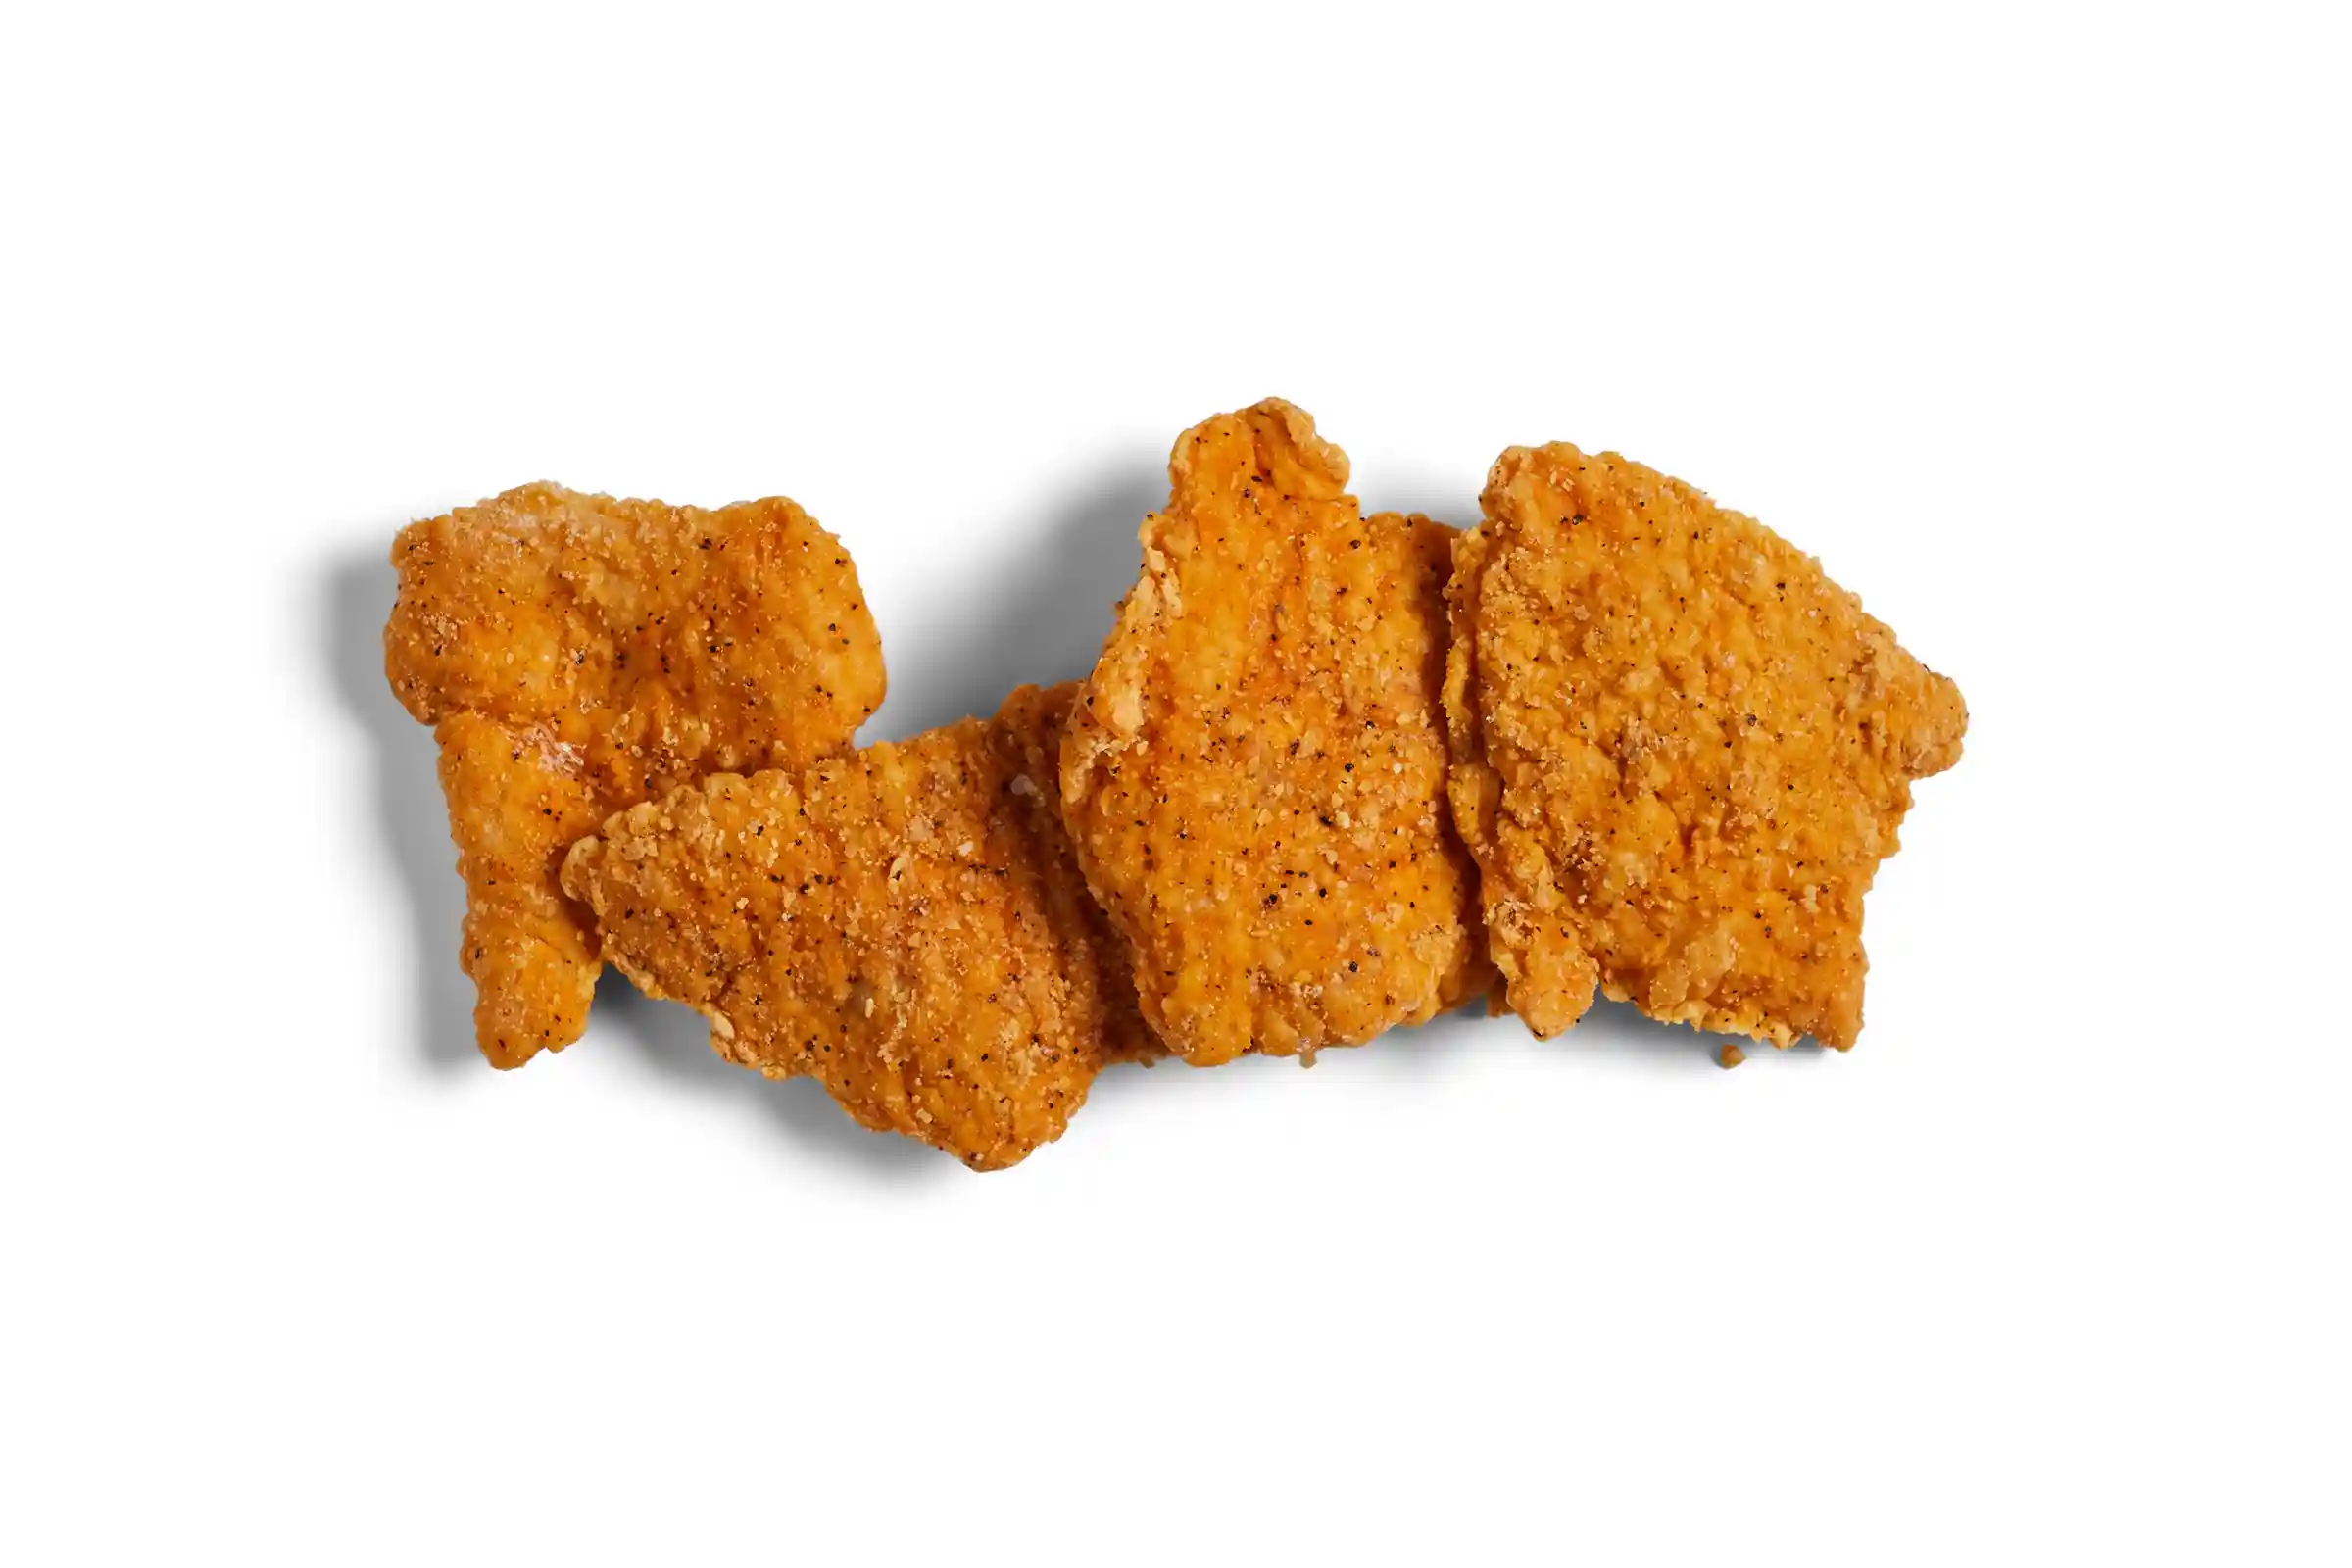 Tyson® Uncooked Breaded Hot & Spicy Chicken Breast Filets, 4 oz._image_11